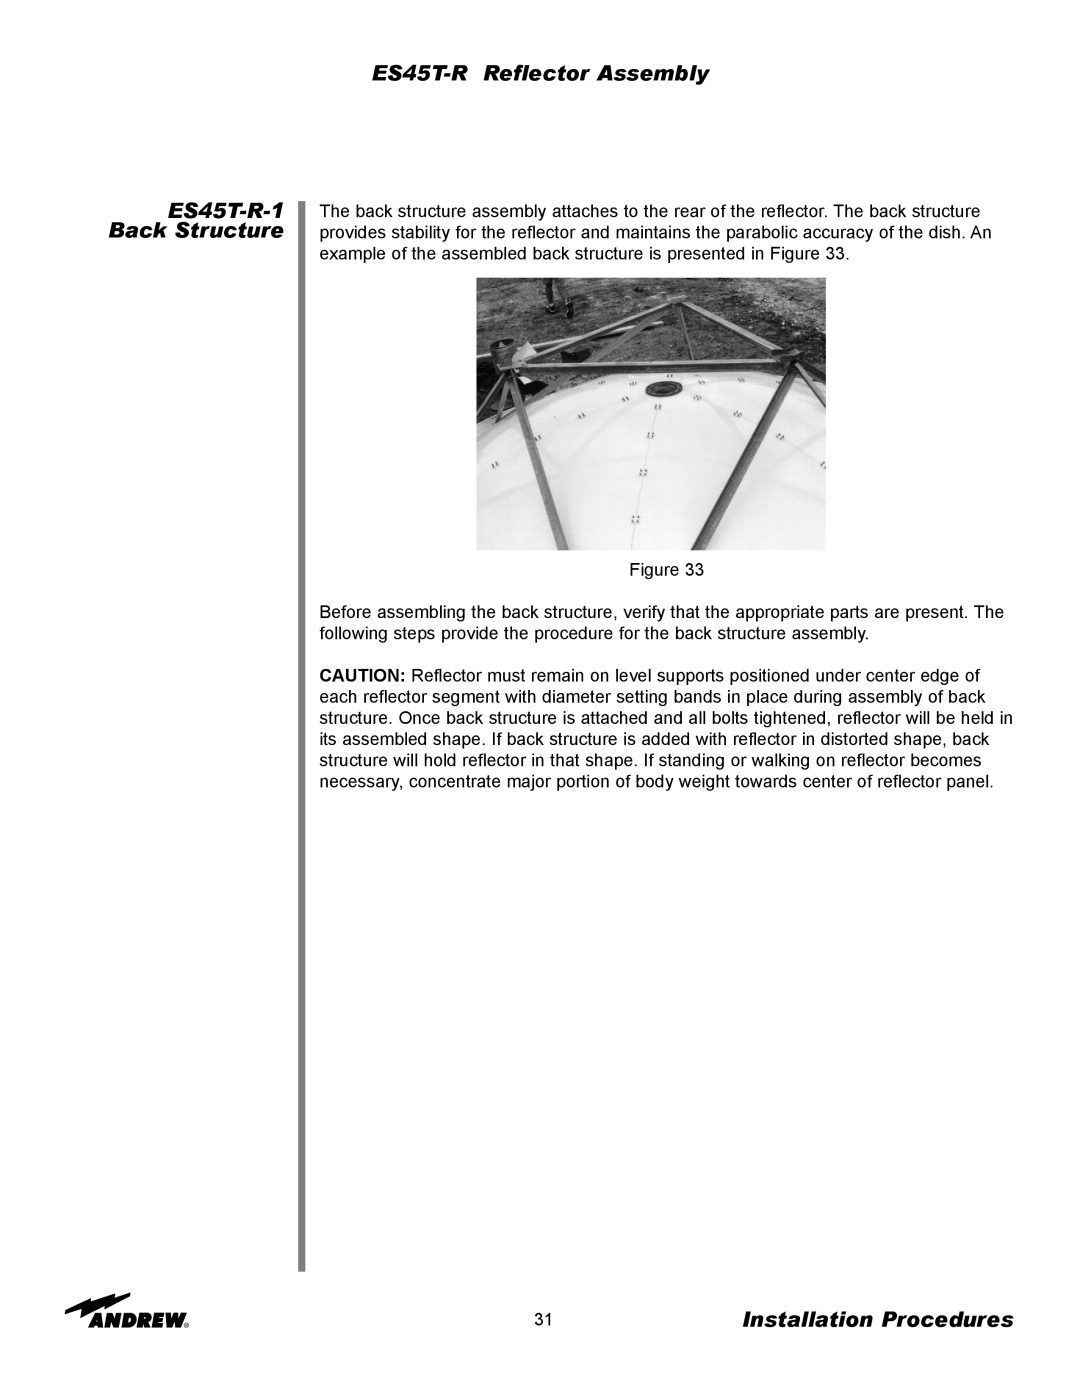 Andrew manual ES45T-R-1Back Structure, ES45T-RReflector Assembly, Installation Procedures 